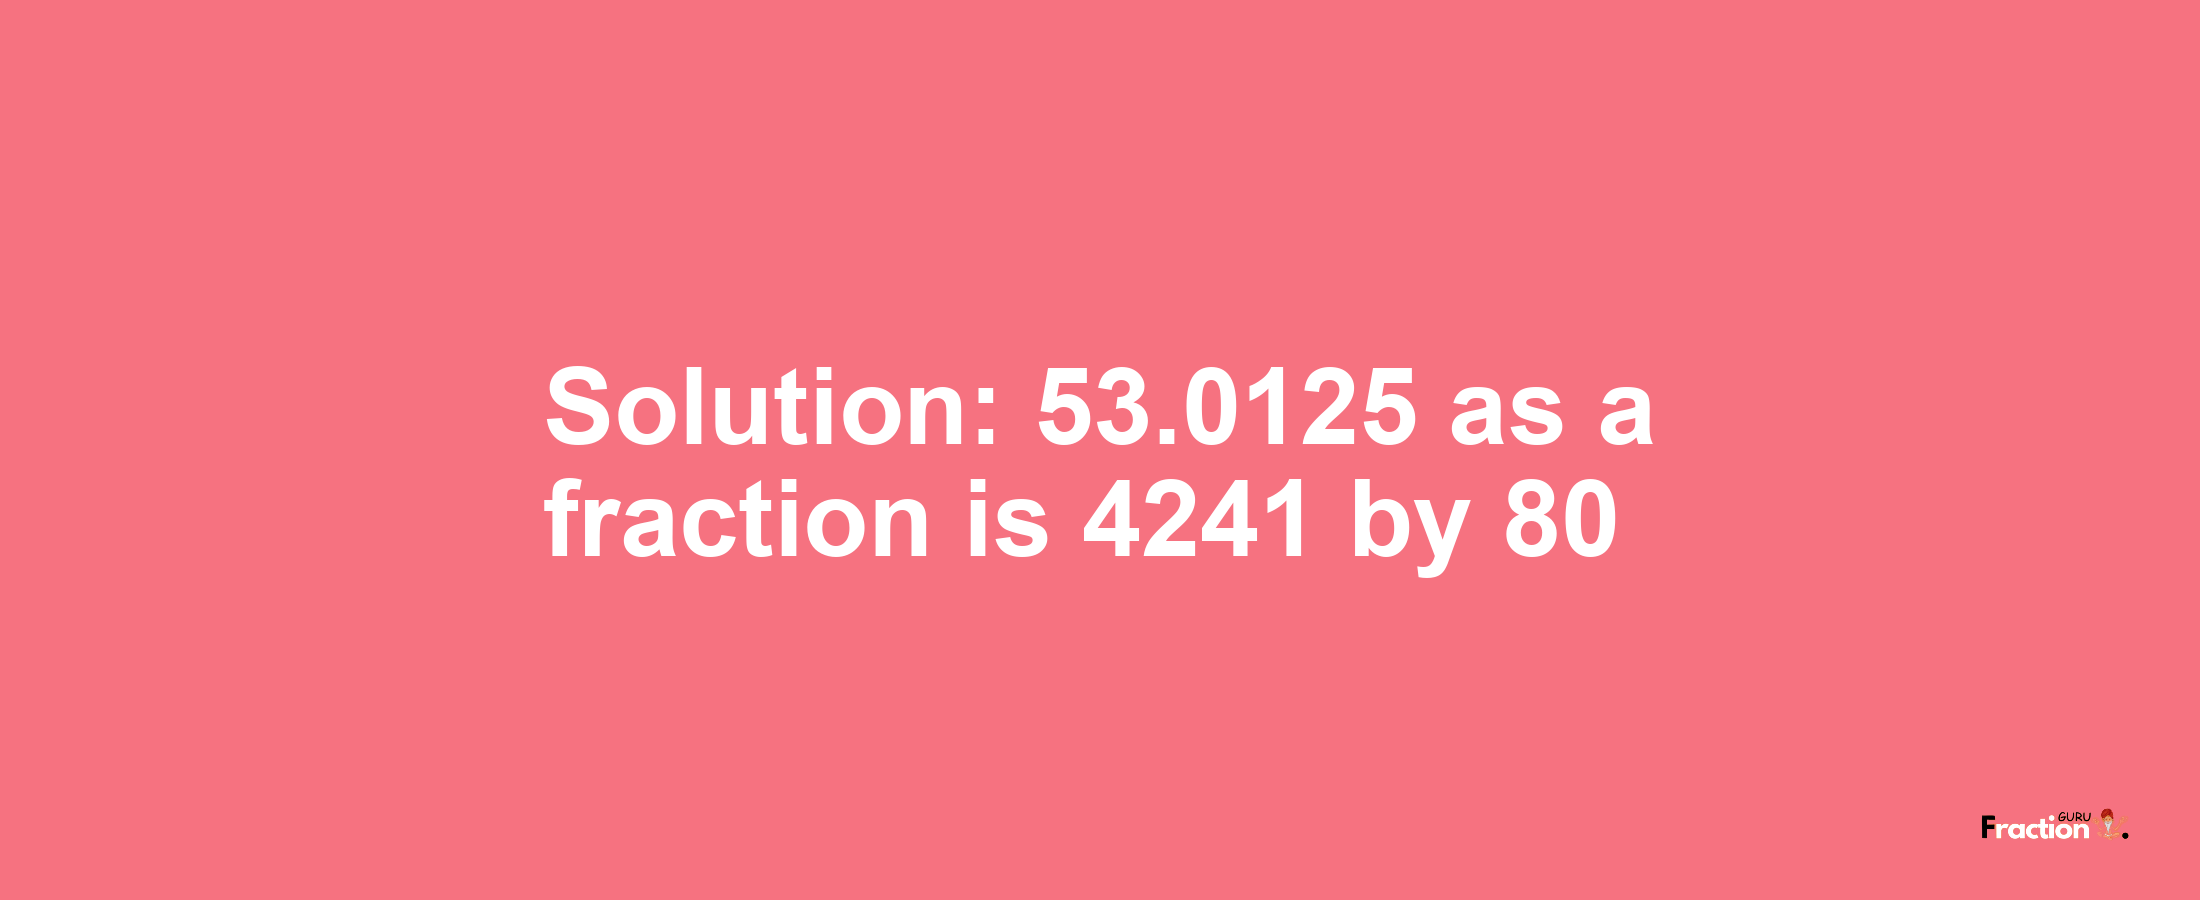 Solution:53.0125 as a fraction is 4241/80